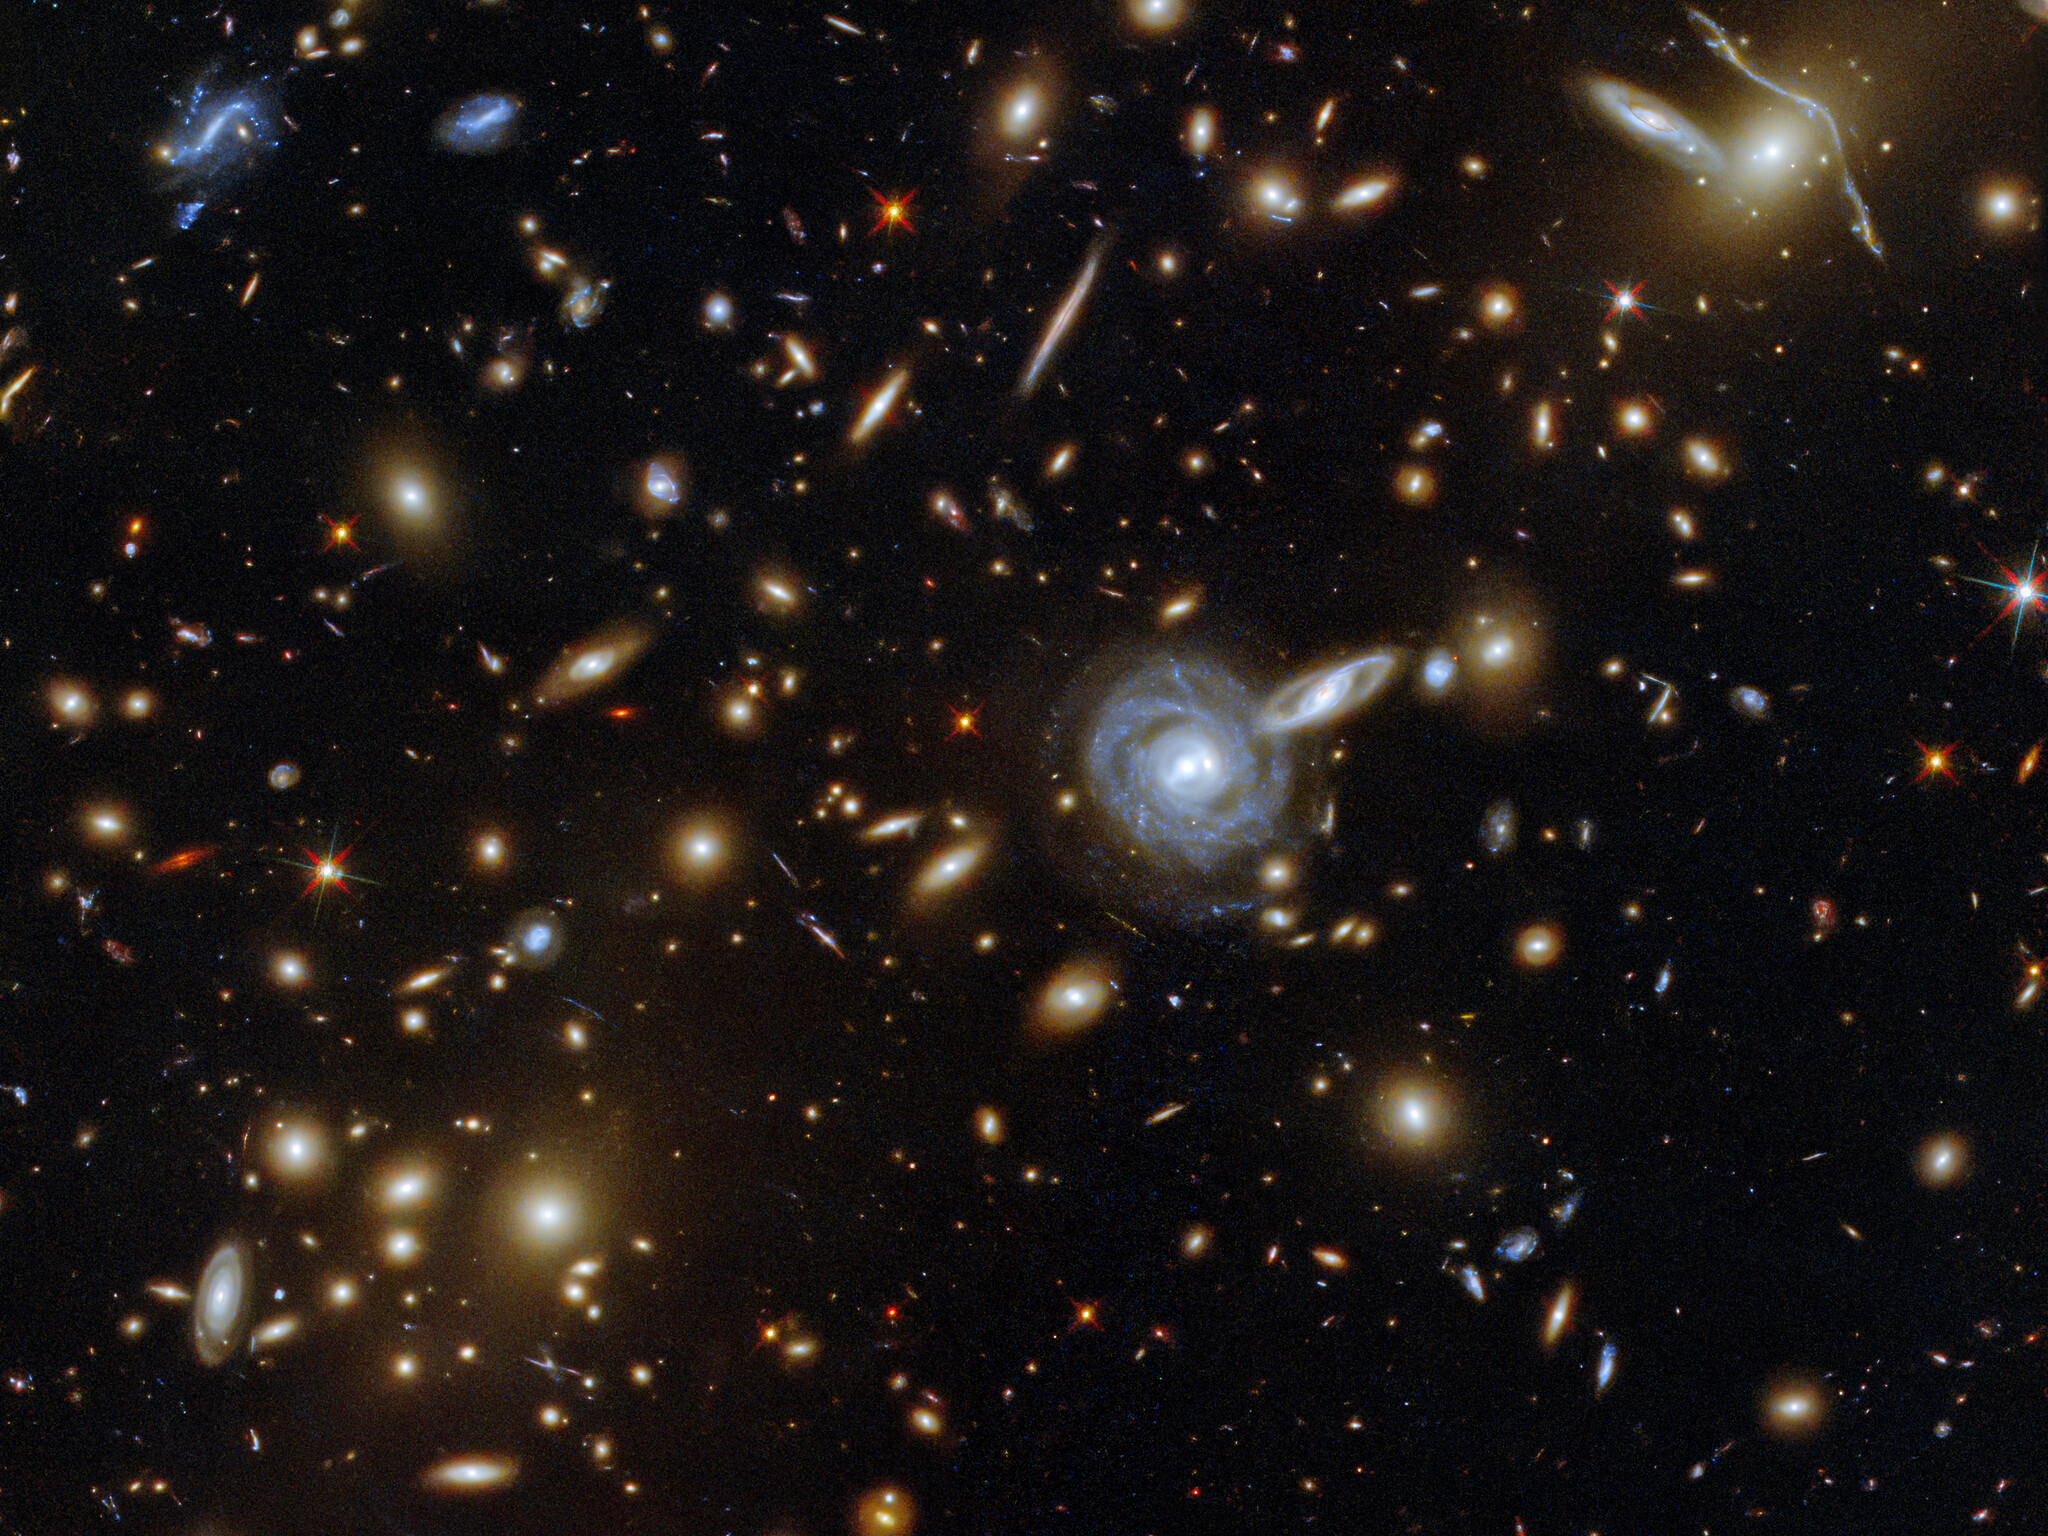 May's image is of a massive galaxy cluster named ACO S 295 and you can see countless galaxies of all shapes and sizes. Credit: ESA/Hubble & NASA, F. Pacaud, D. Coe